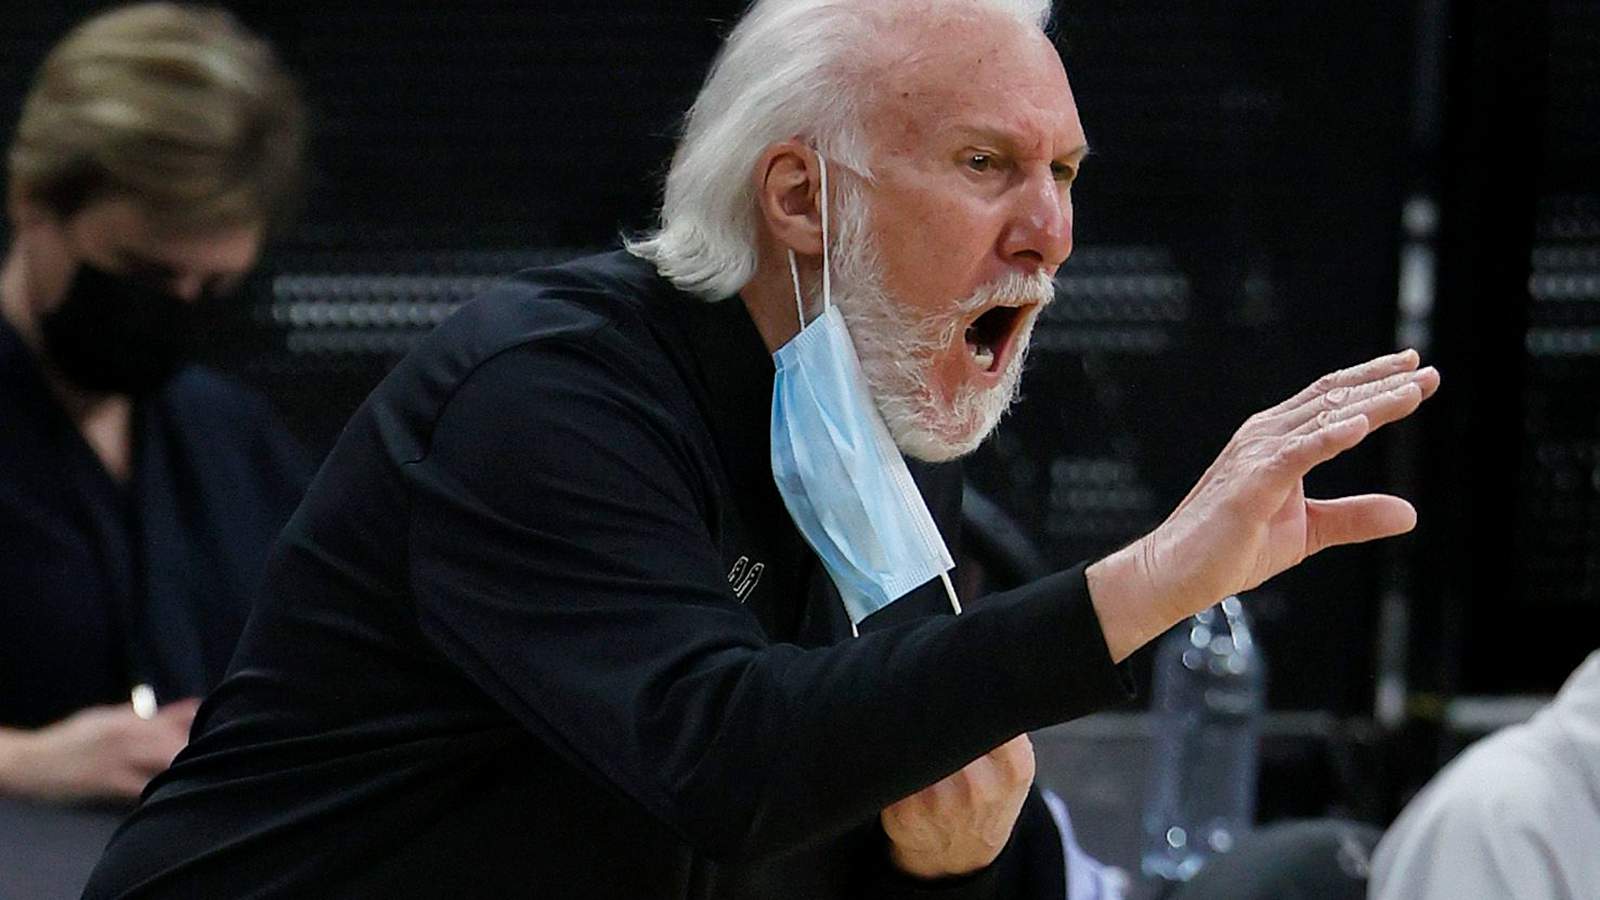 Popovich delivers fiery response to police killing of Daunte Wright: ‘It makes you sick to your stomach’